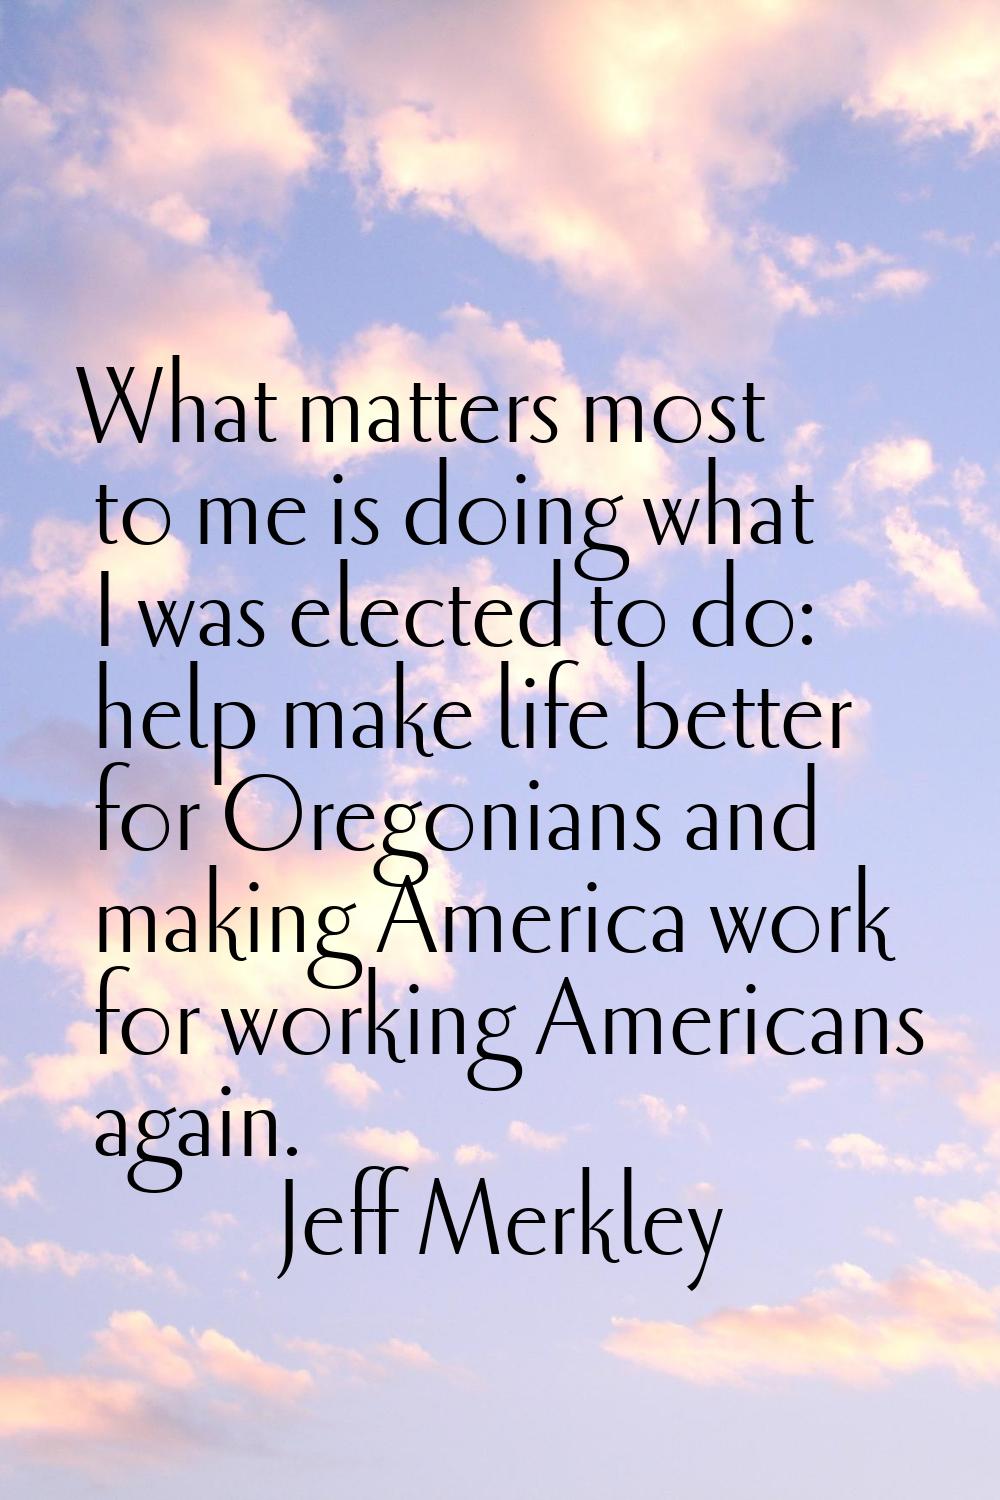 What matters most to me is doing what I was elected to do: help make life better for Oregonians and